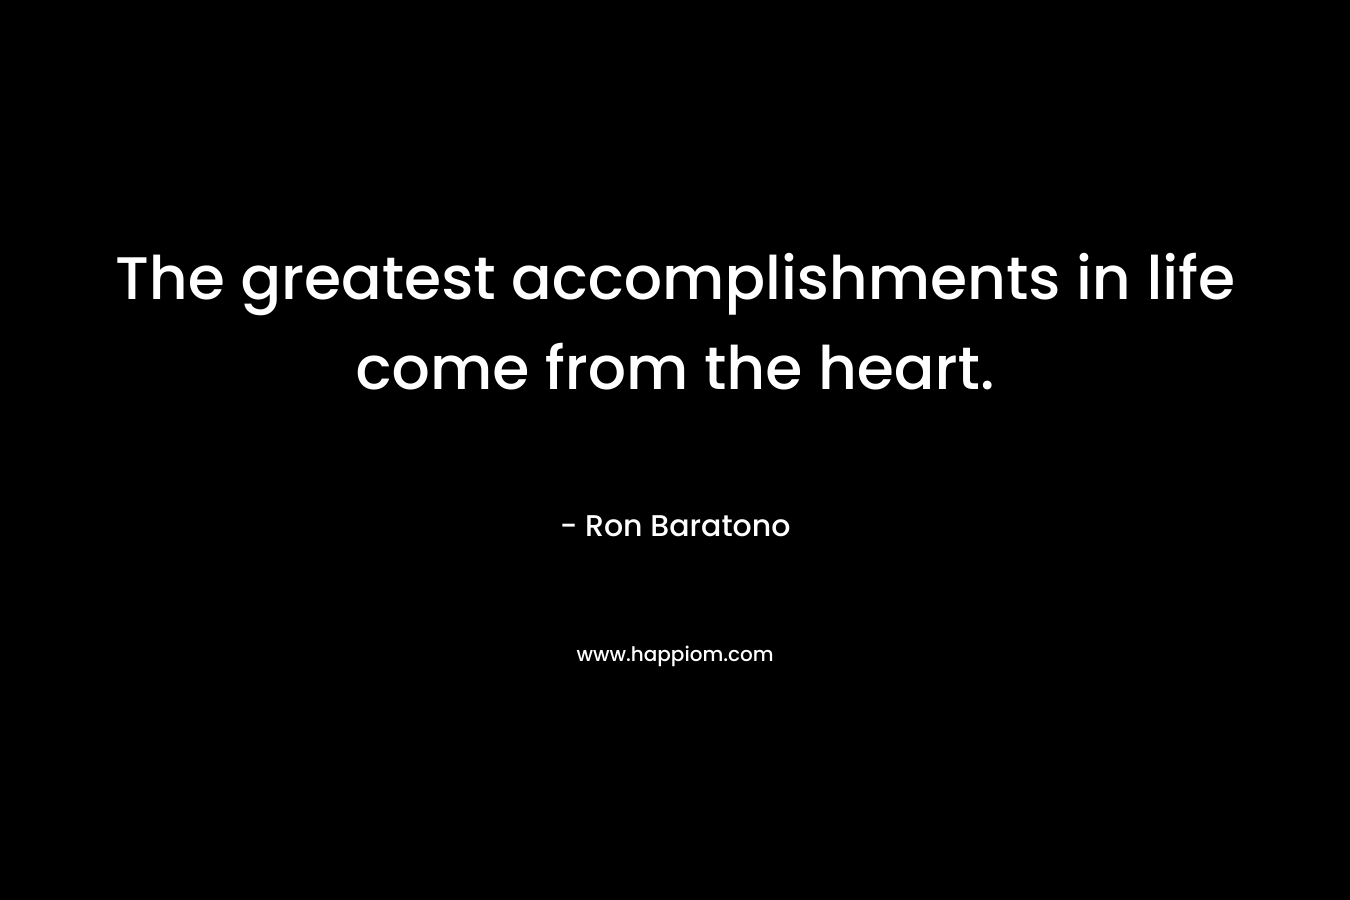 The greatest accomplishments in life come from the heart.